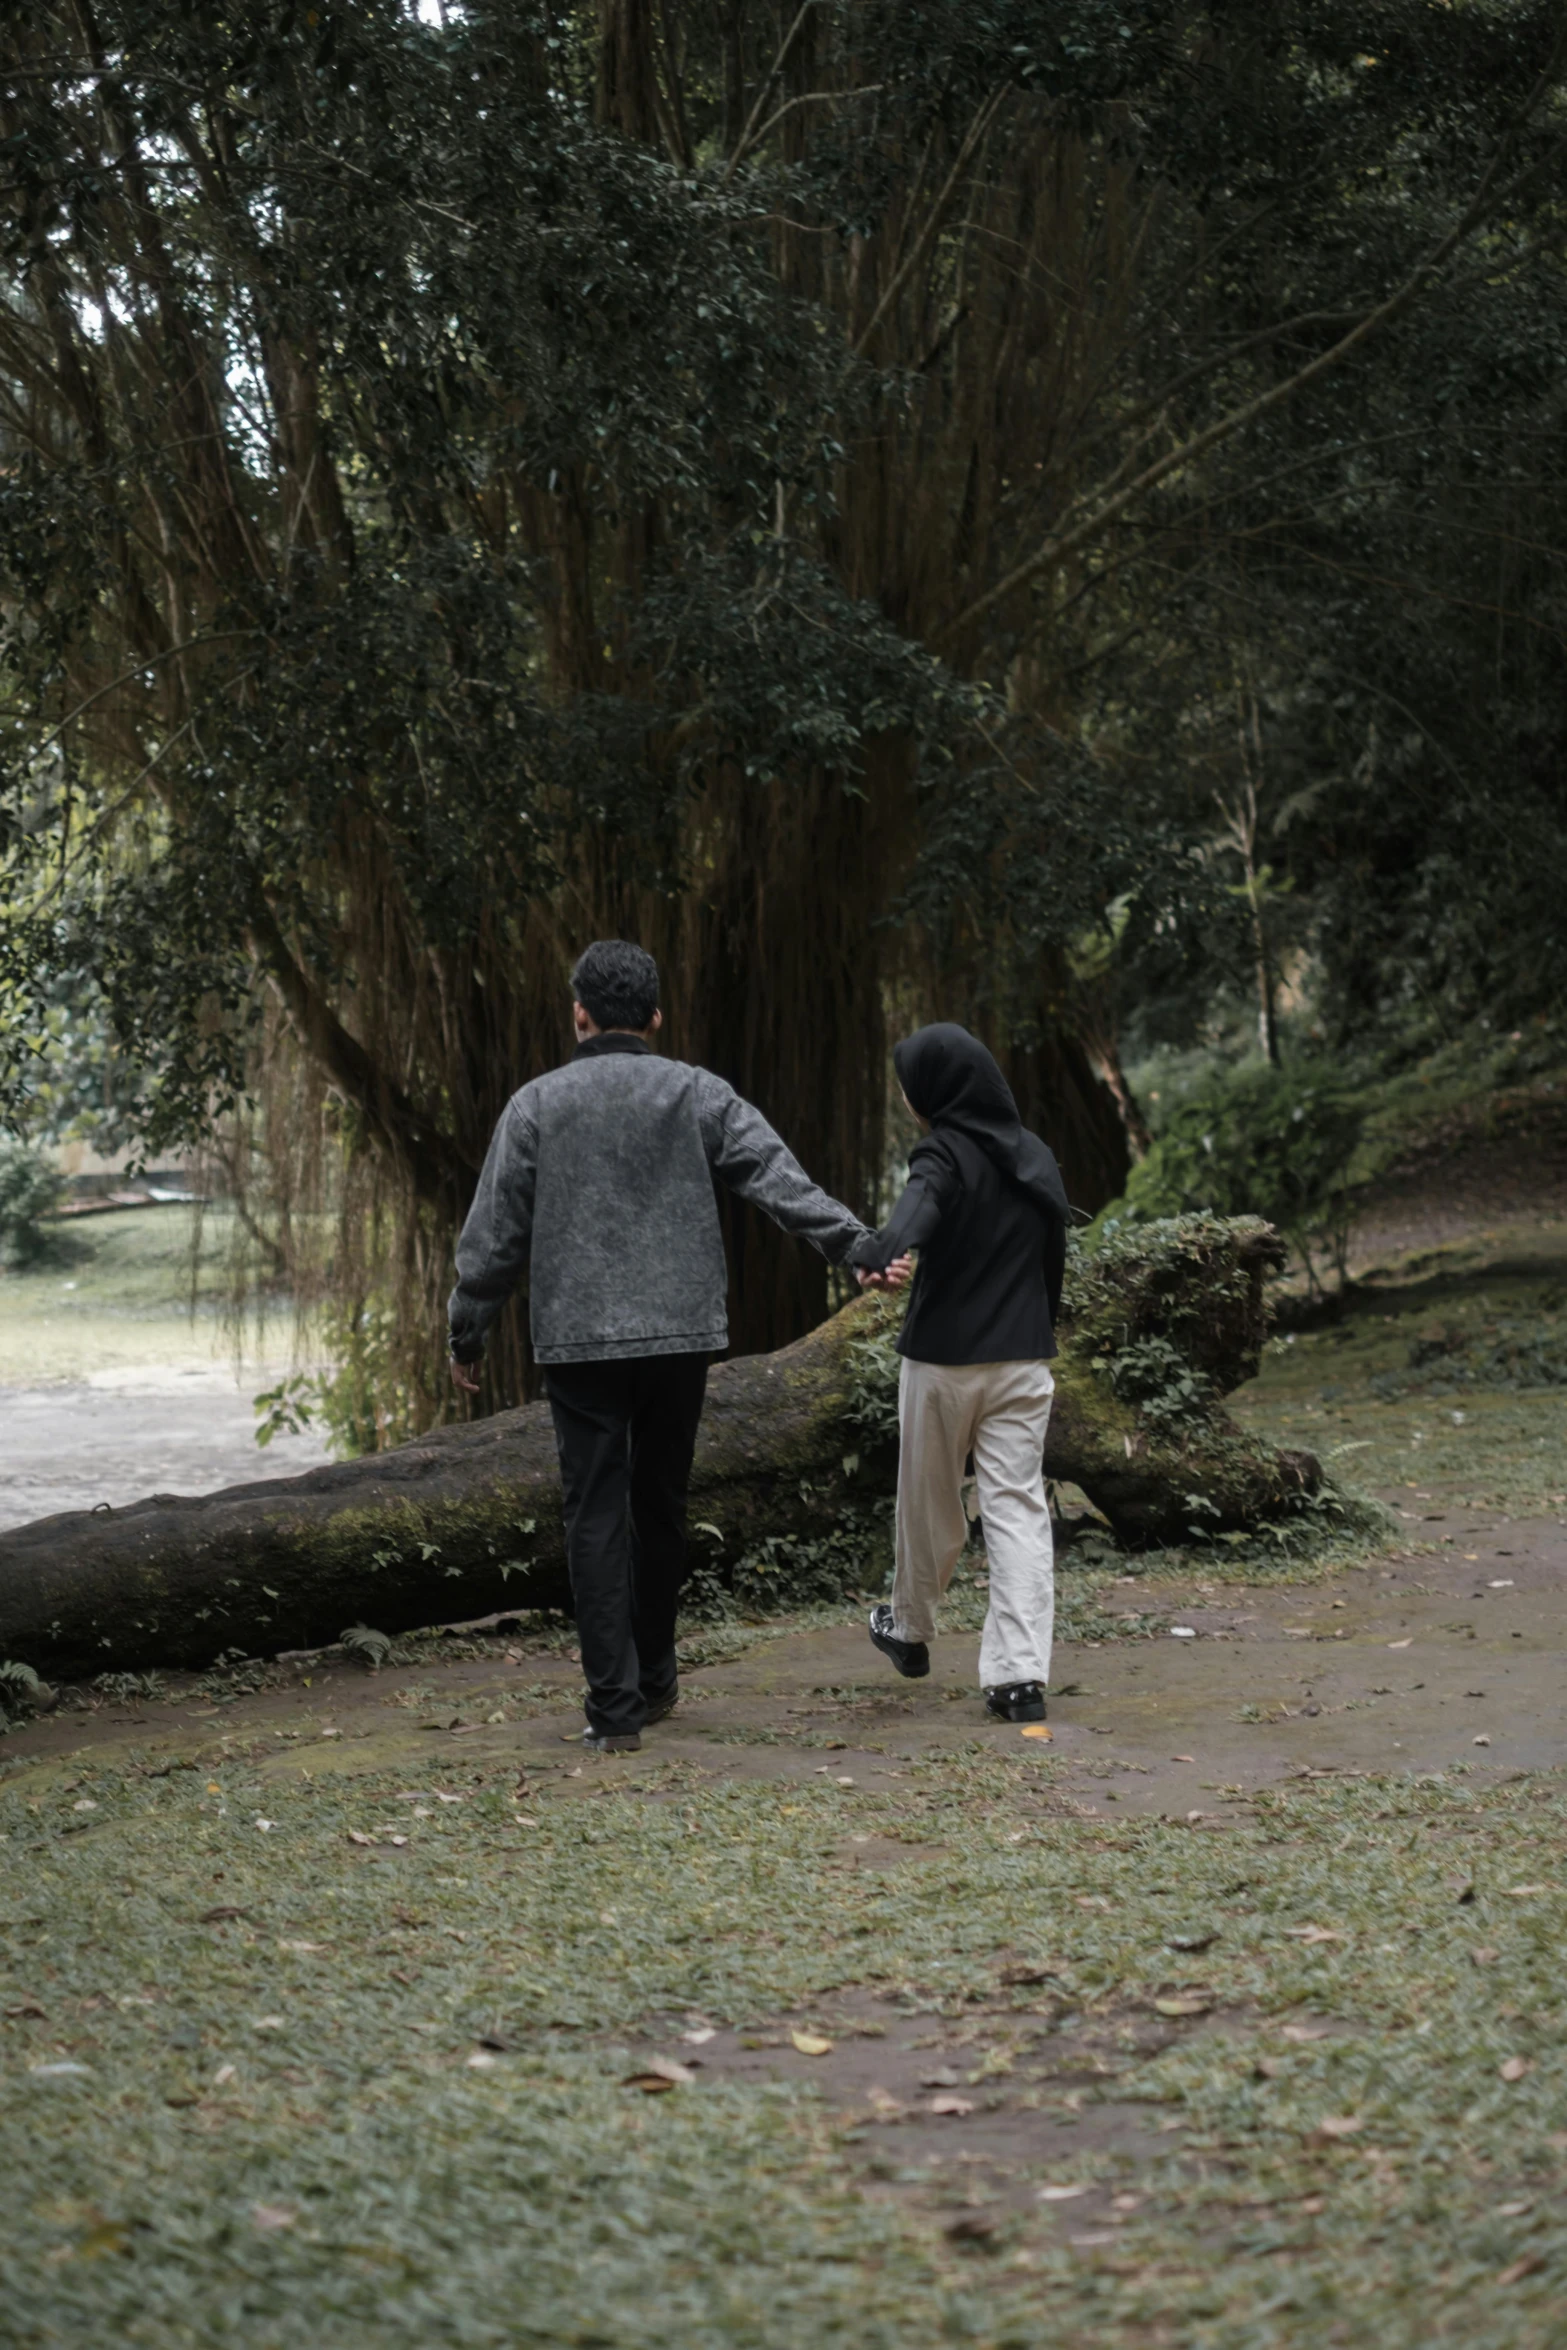 two people are walking in the woods, one holding on to a fallen tree